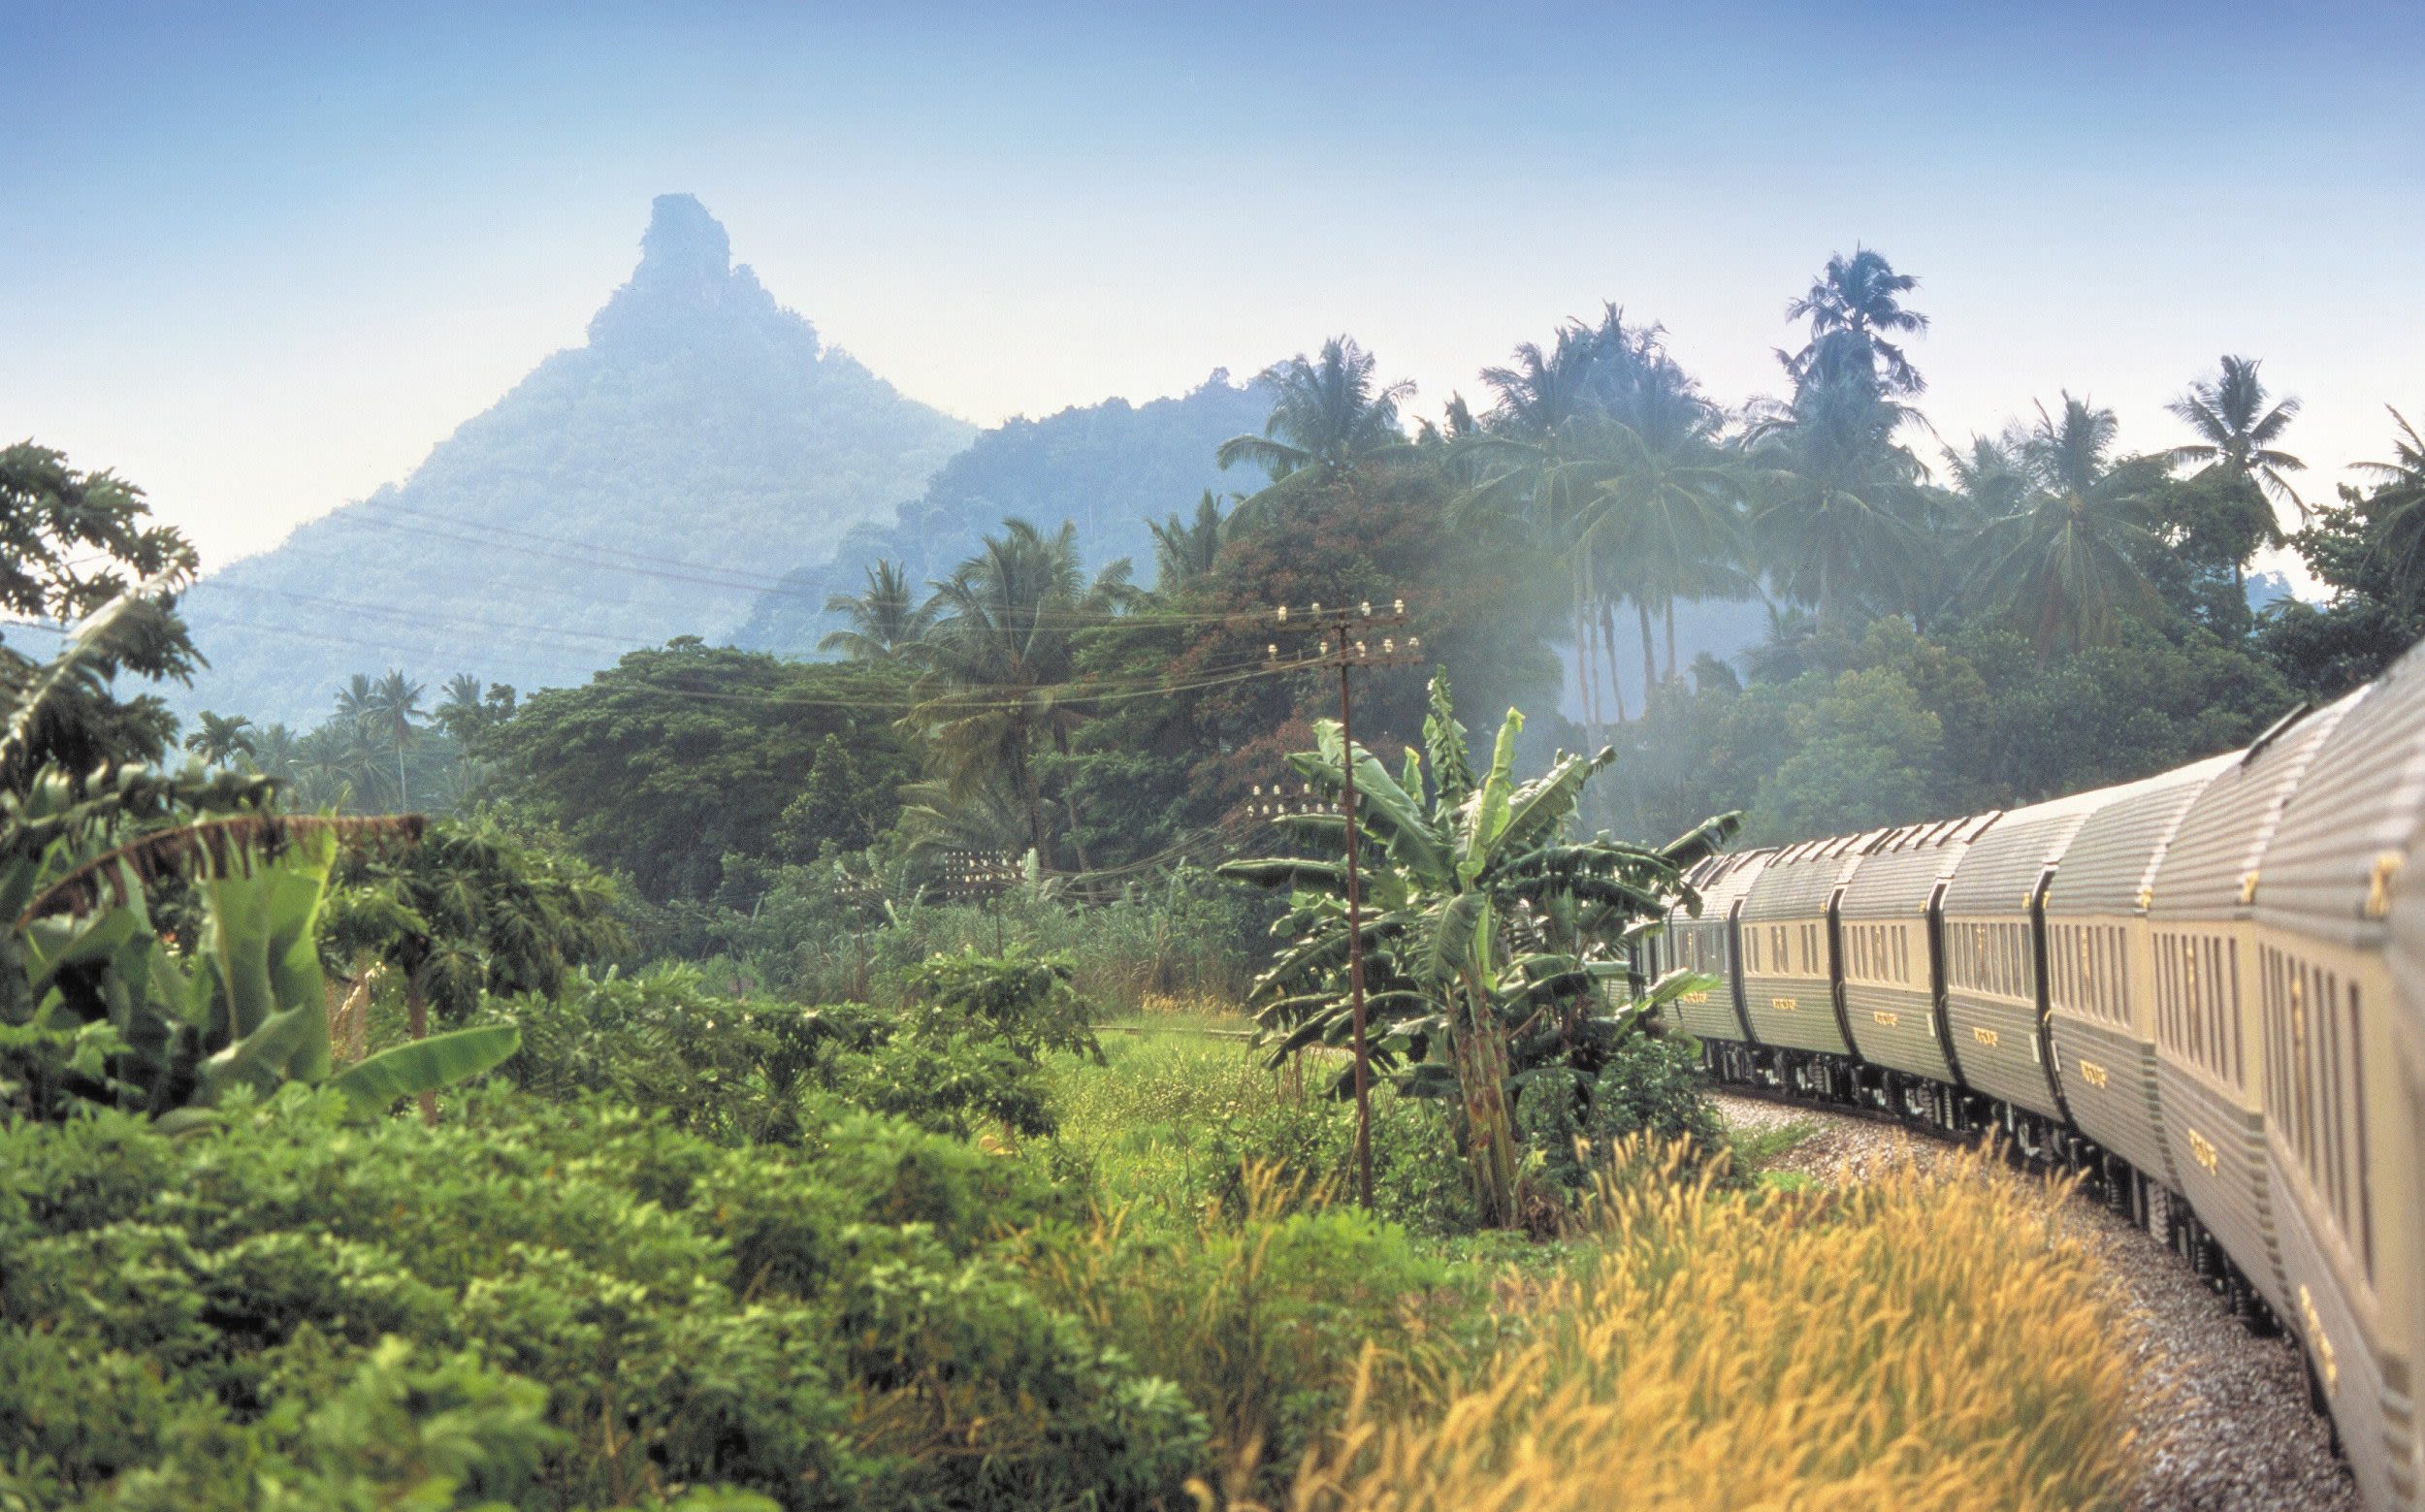 On board the most luxurious train journey Asia has to offer